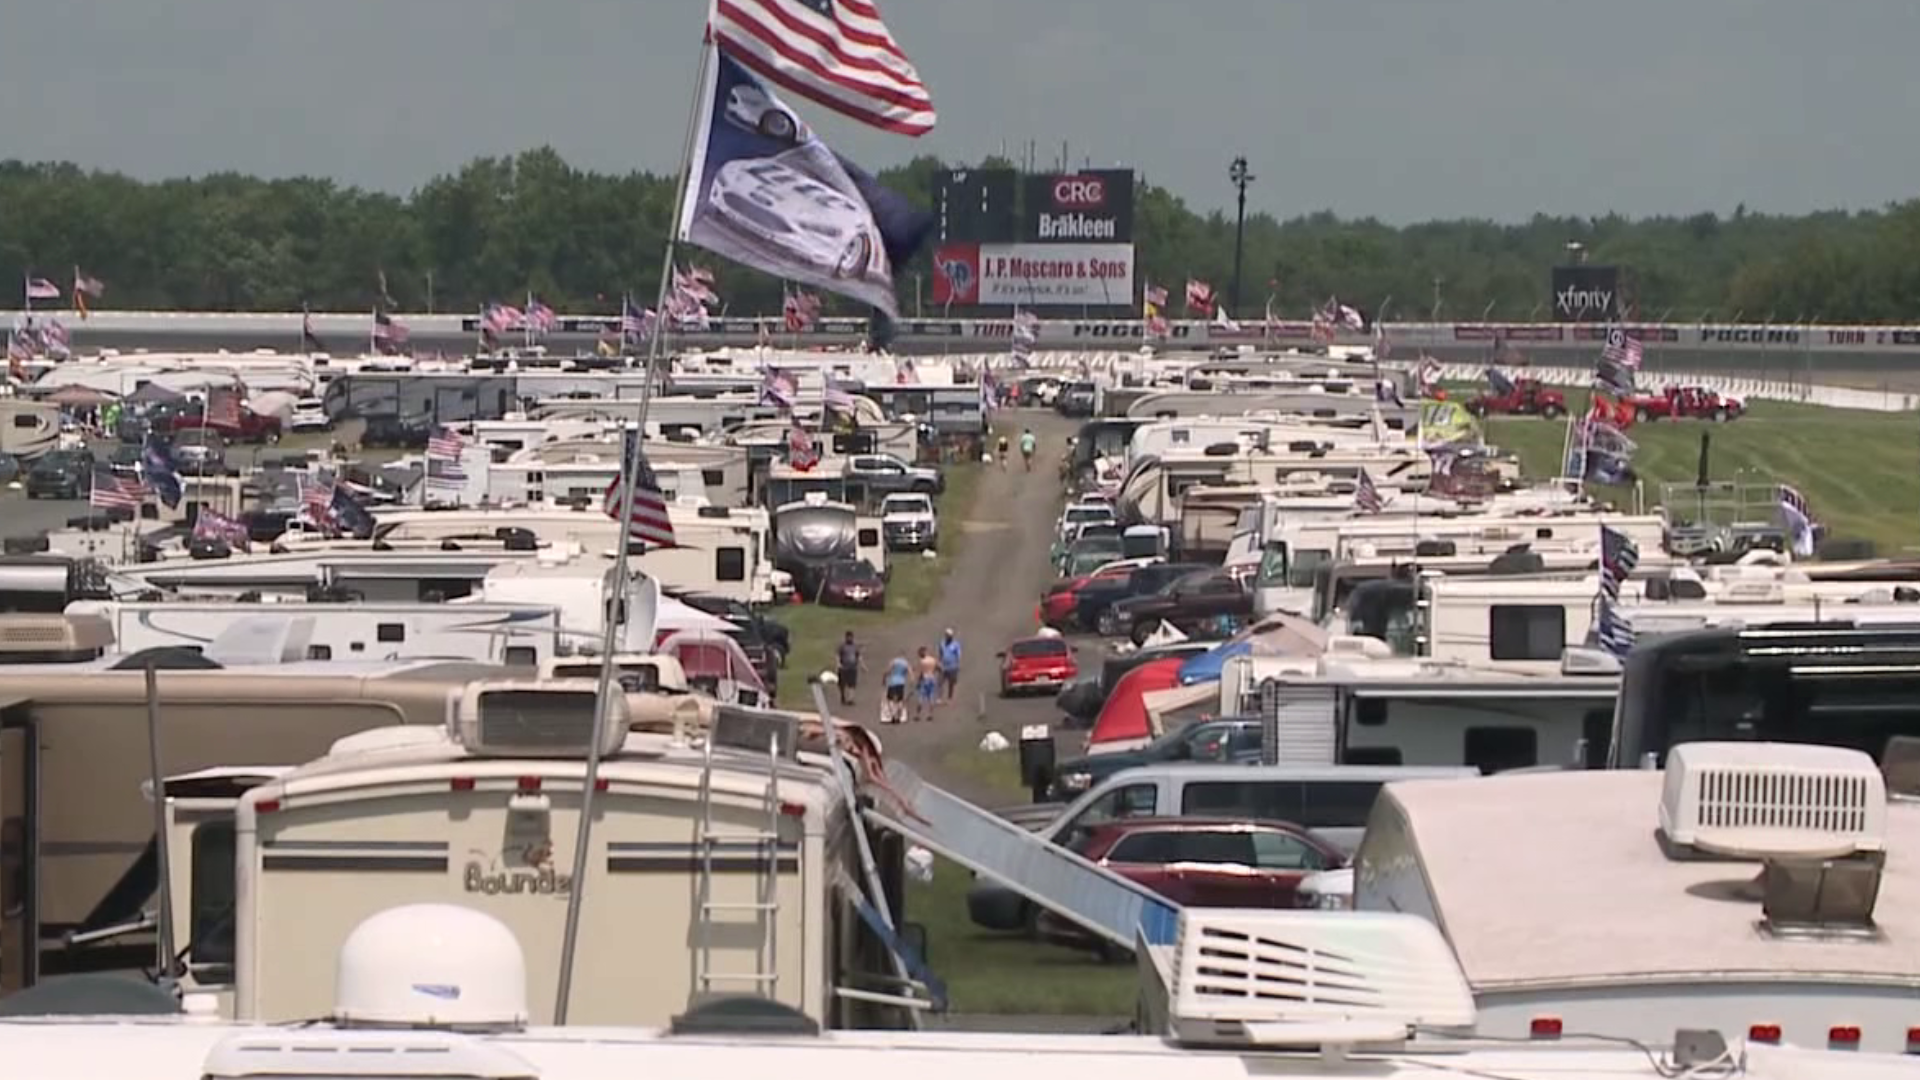 This is the first in-person, doubleheader NASCAR race with spectators in over a year. Fans we spoke with say they've missed it the people and the atmosphere.